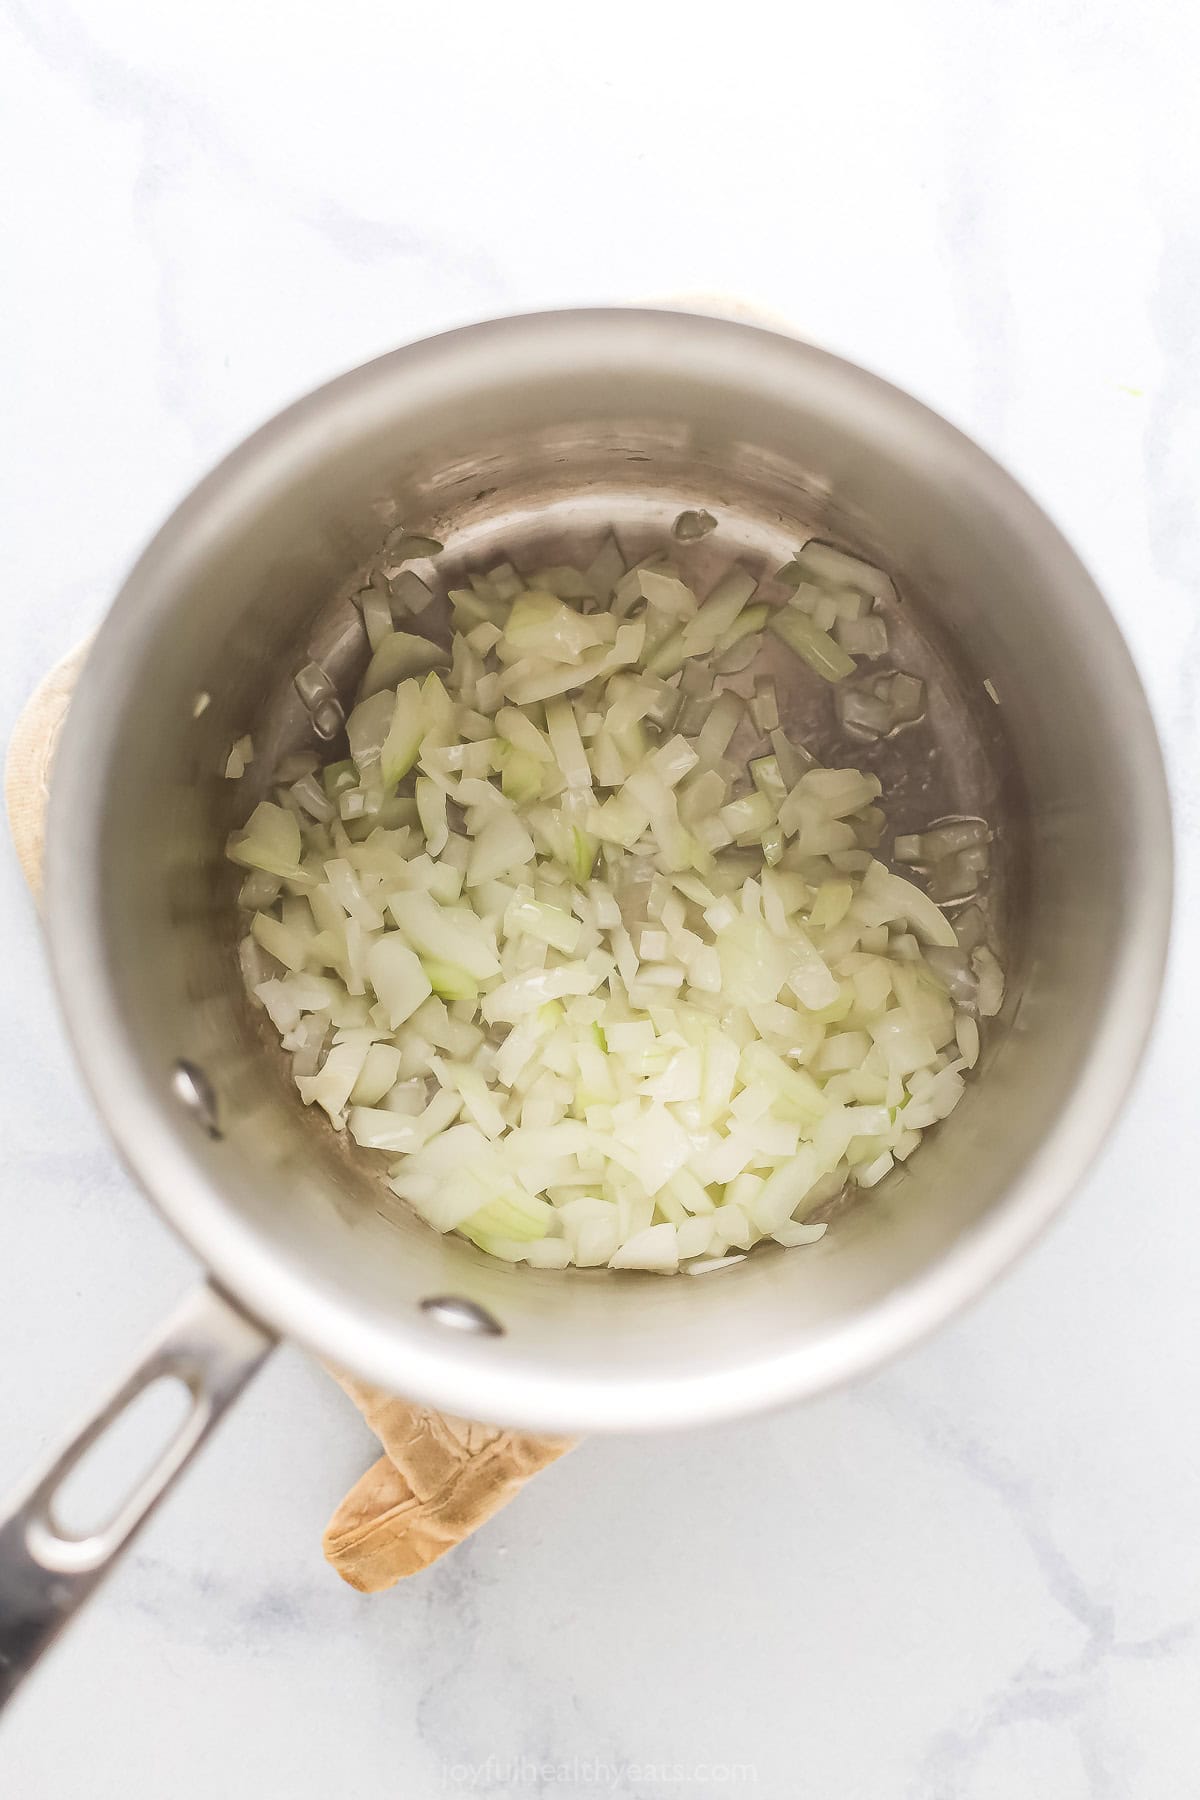 Cooking the onions in the pot. 